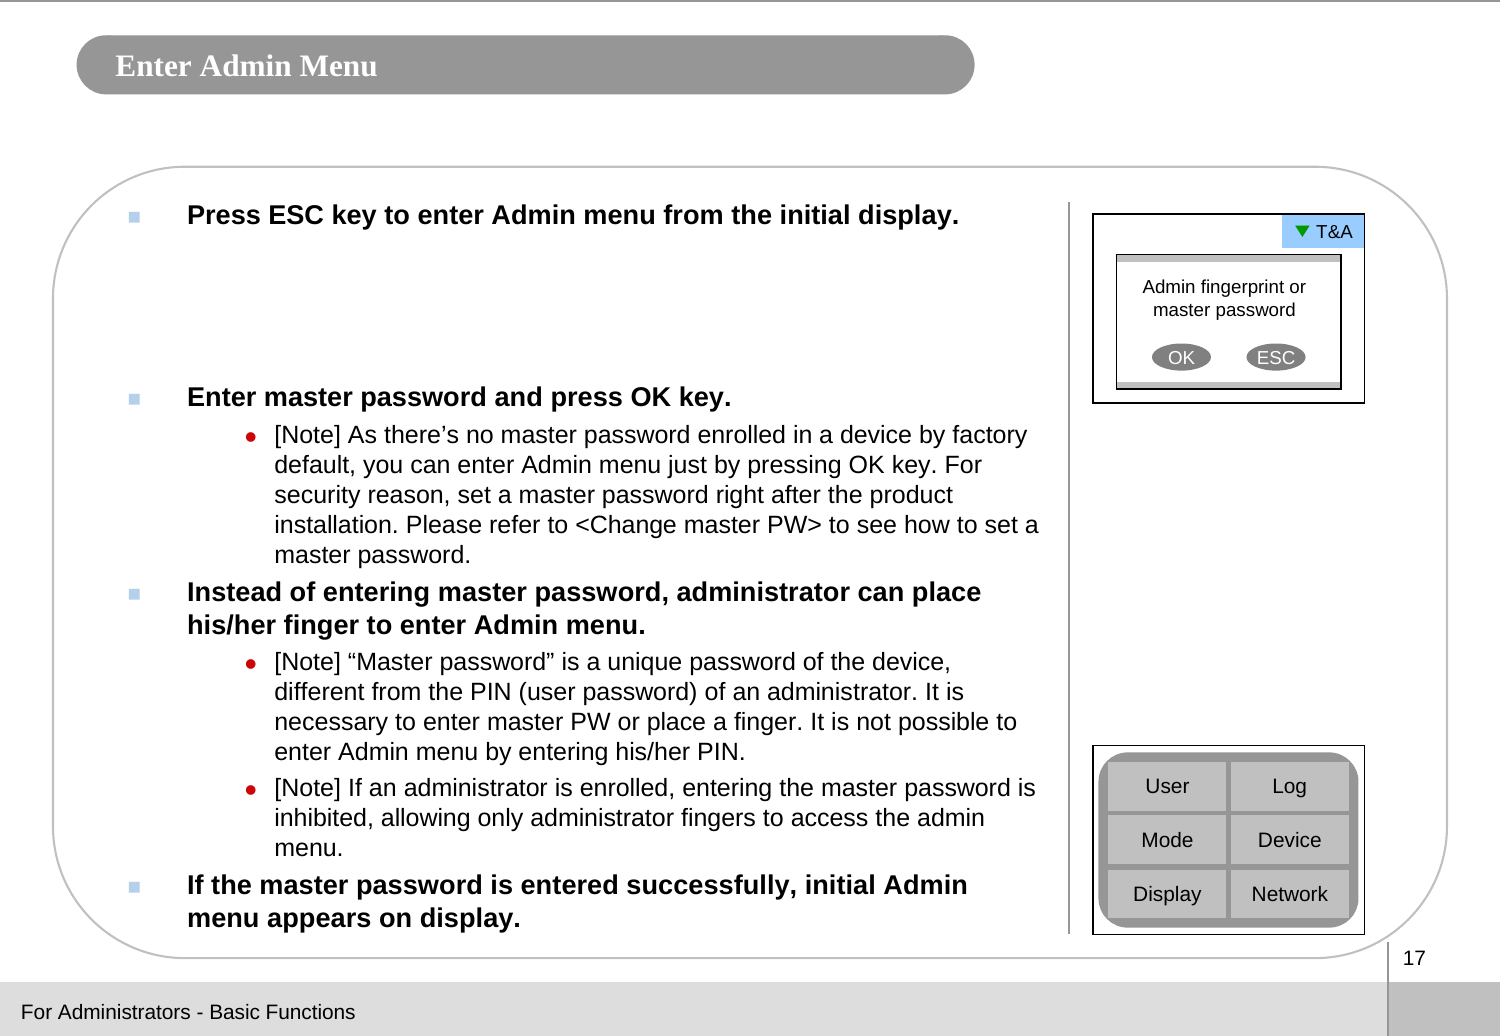 17Enter Admin MenuPress ESC key to enter Admin menu from the initial display.Enter master password and press OK key.z[Note] As there’s no master password enrolled in a device by factory default, you can enter Admin menu just by pressing OK key. For security reason, set a master password right after the product installation. Please refer to &lt;Change master PW&gt; to see how to set a master password.Instead of entering master password, administrator can place his/her finger to enter Admin menu. z[Note] “Master password” is a unique password of the device, different from the PIN (user password) of an administrator. It is necessary to enter master PW or place a finger. It is not possible to enter Admin menu by entering his/her PIN.z[Note] If an administrator is enrolled, entering the master password is inhibited, allowing only administrator fingers to access the admin menu.If the master password is entered successfully, initial Admin menu appears on display.▼T&amp;AAdmin fingerprint or master passwordOK ESCDeviceUserModeDisplayLogNetworkFor Administrators - Basic Functions